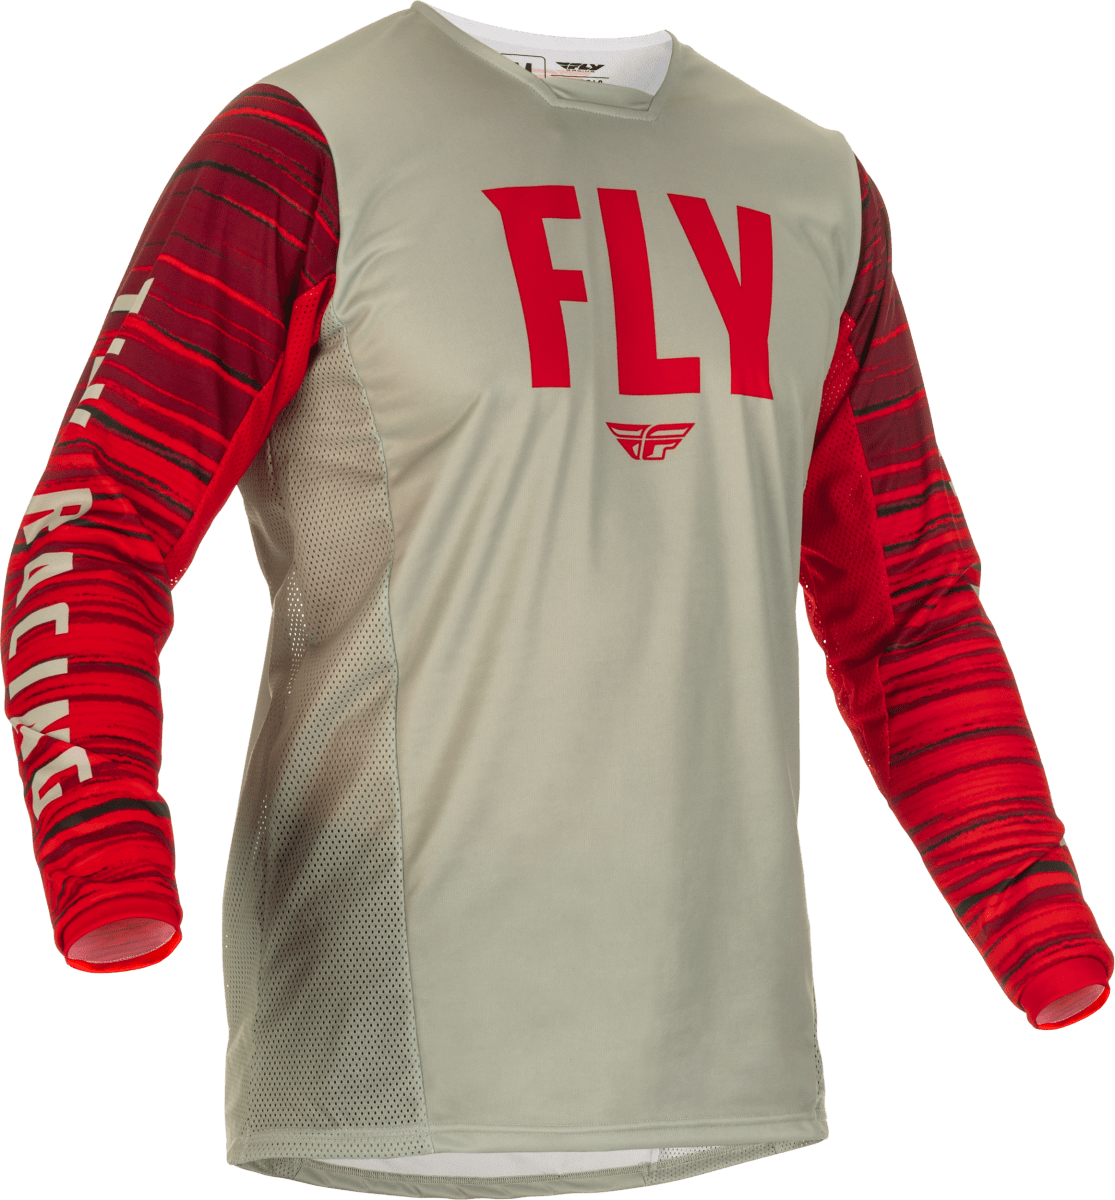 FLY RACING - KINETIC WAVE JERSEY - 375-522L - 191361289491